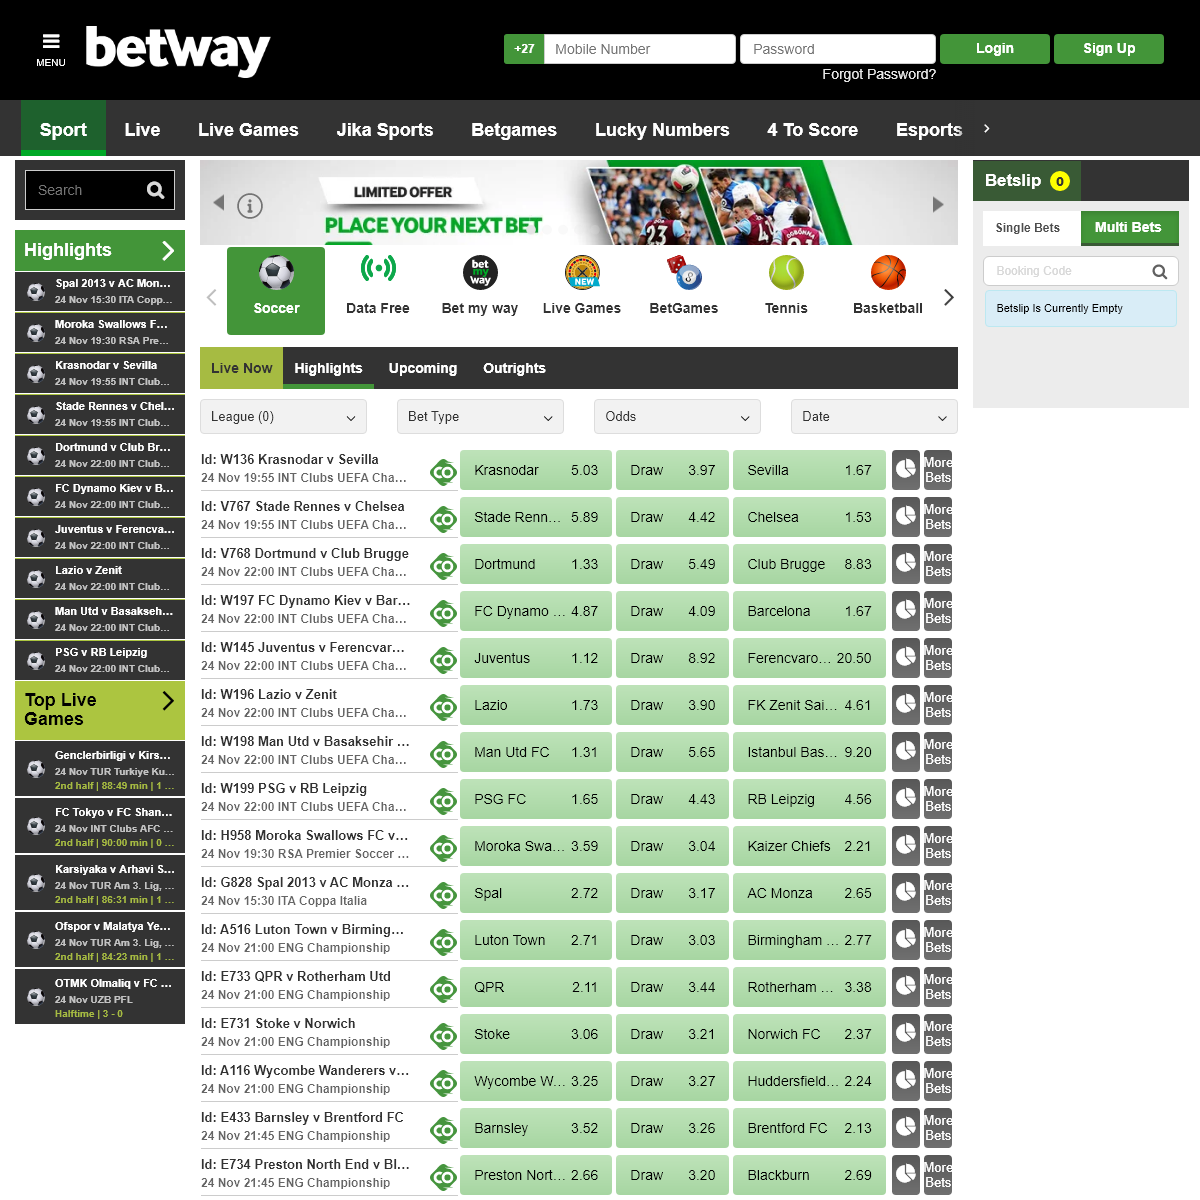 A complete backup of betway.co.za